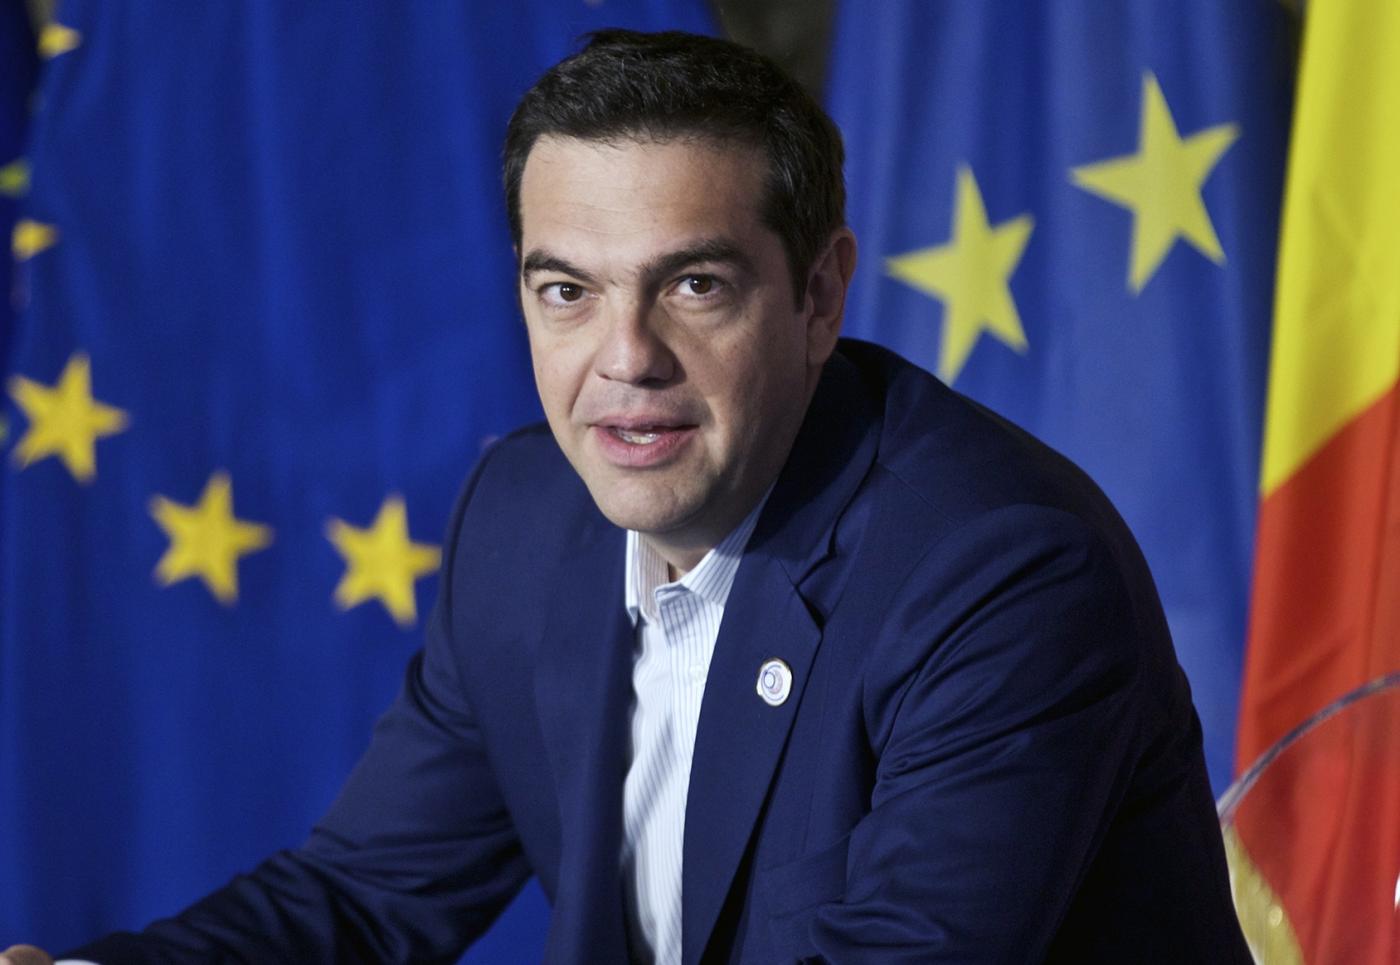 Greece Prime Minister Alexis Tsipras. (File Photo: IANS) by .